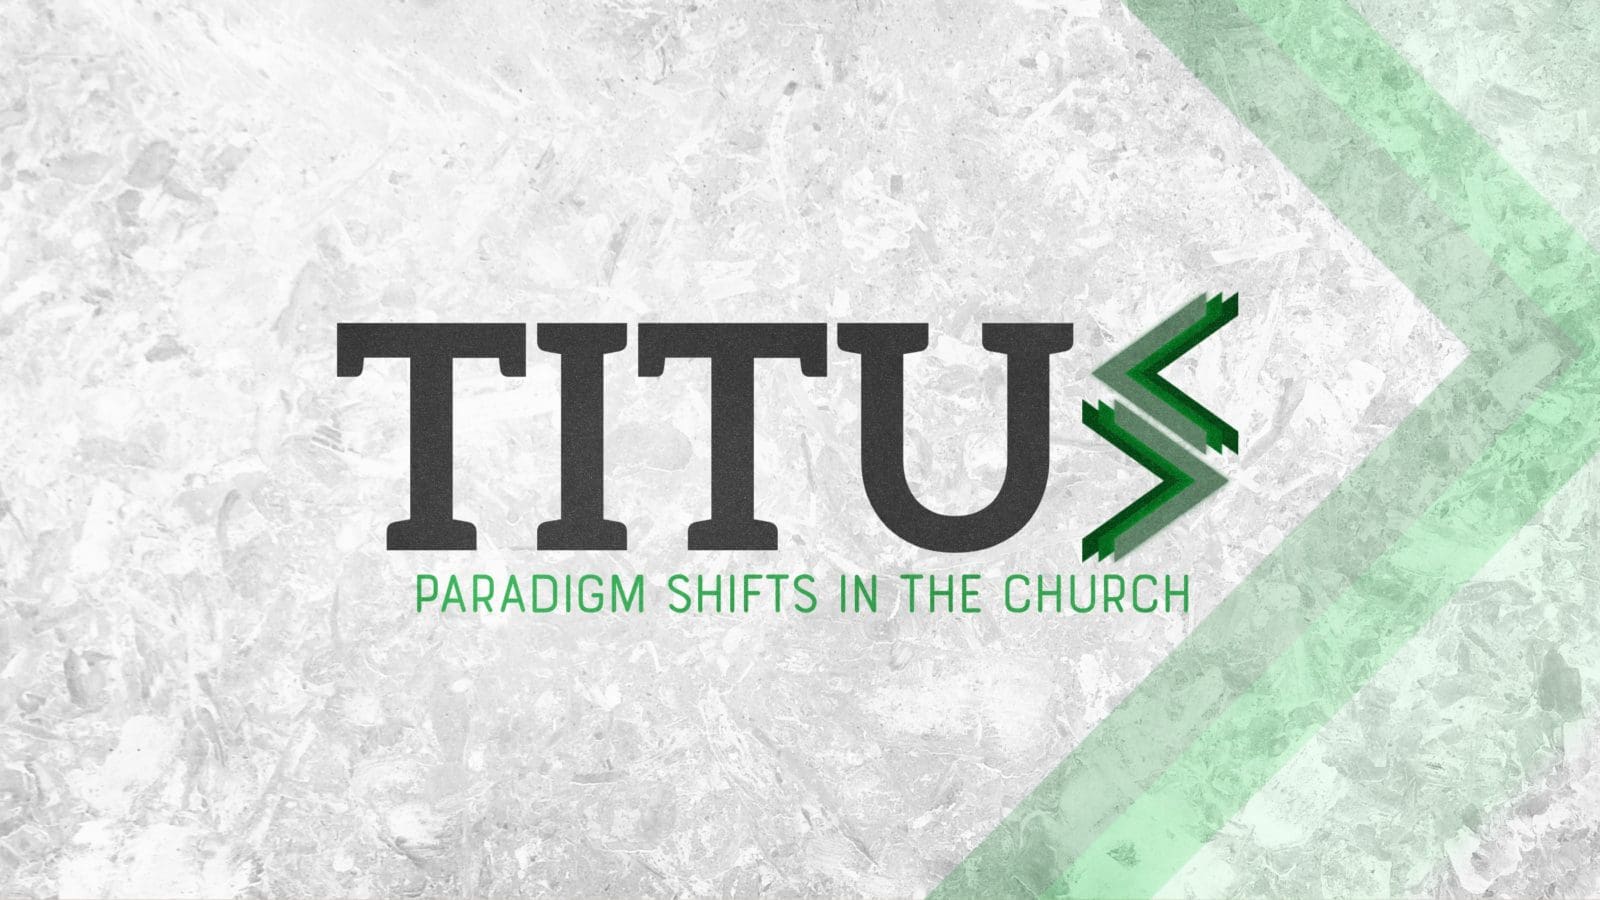 Titus [Paradigm Shifts in the Church]